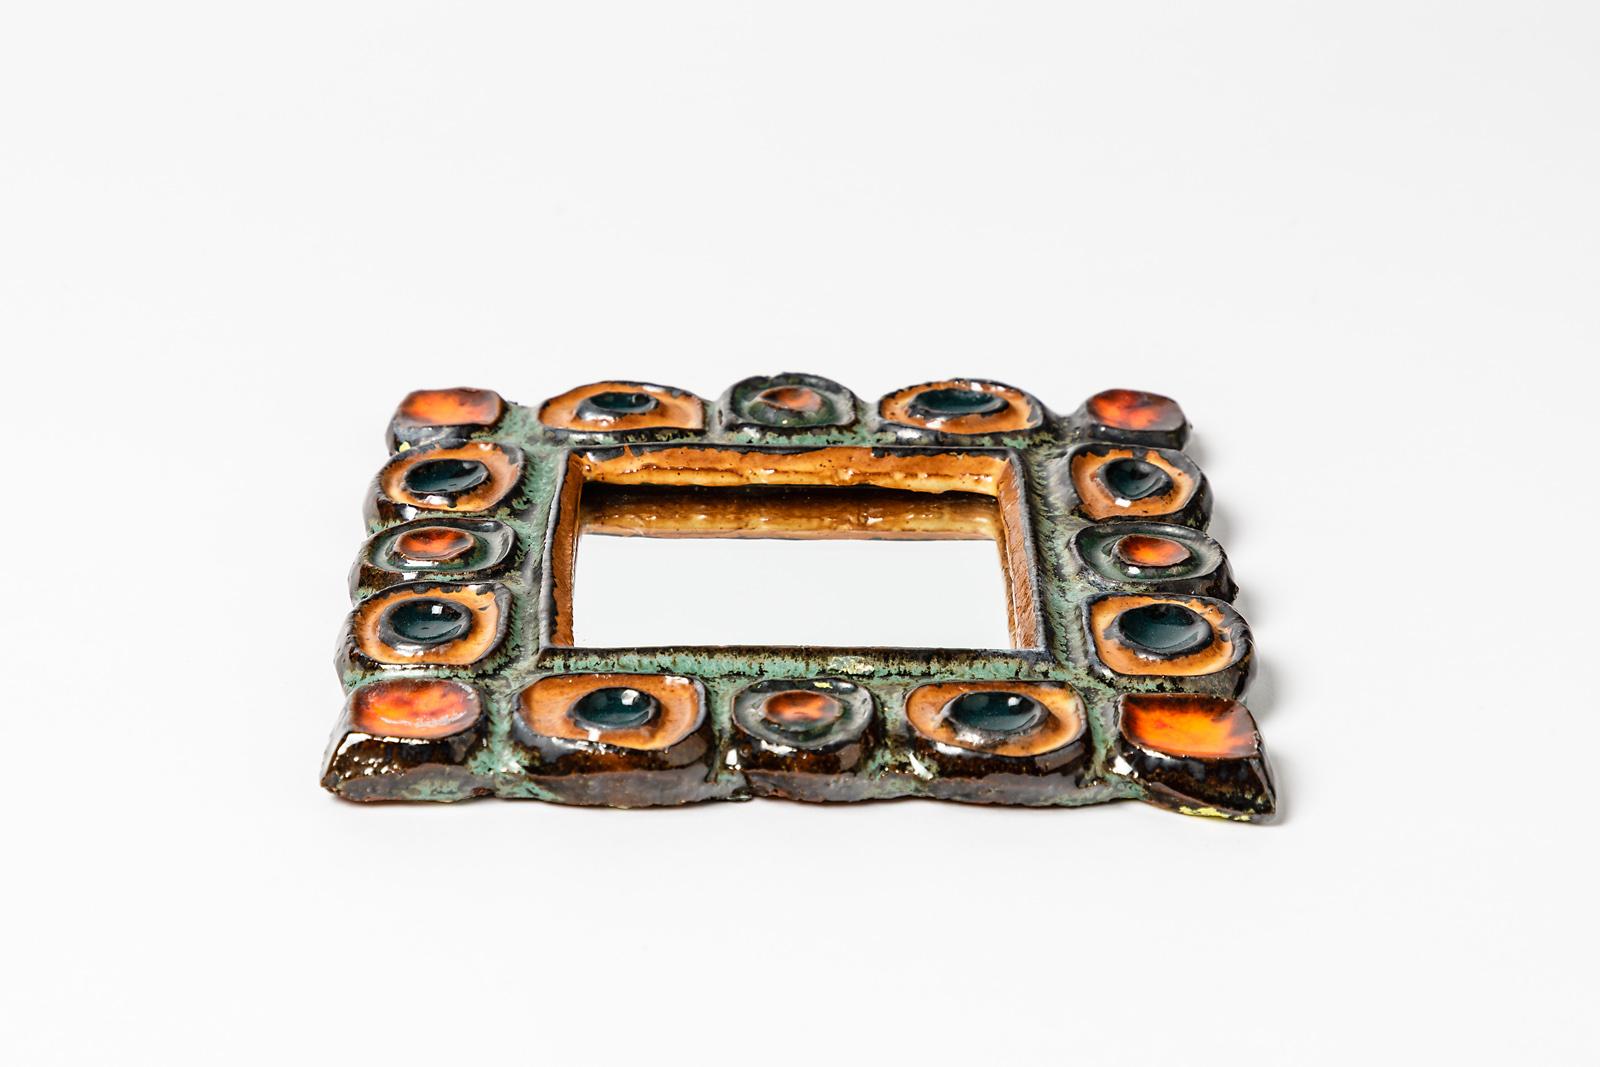 Les Argonautes

Elegant and decorative ceramic wall mirror by French artist

circa 1960, midcentury French design

Orange and green ceramic glazes colors

Original perfect conditions

Measures: Height 2cm, large 16cm.
 